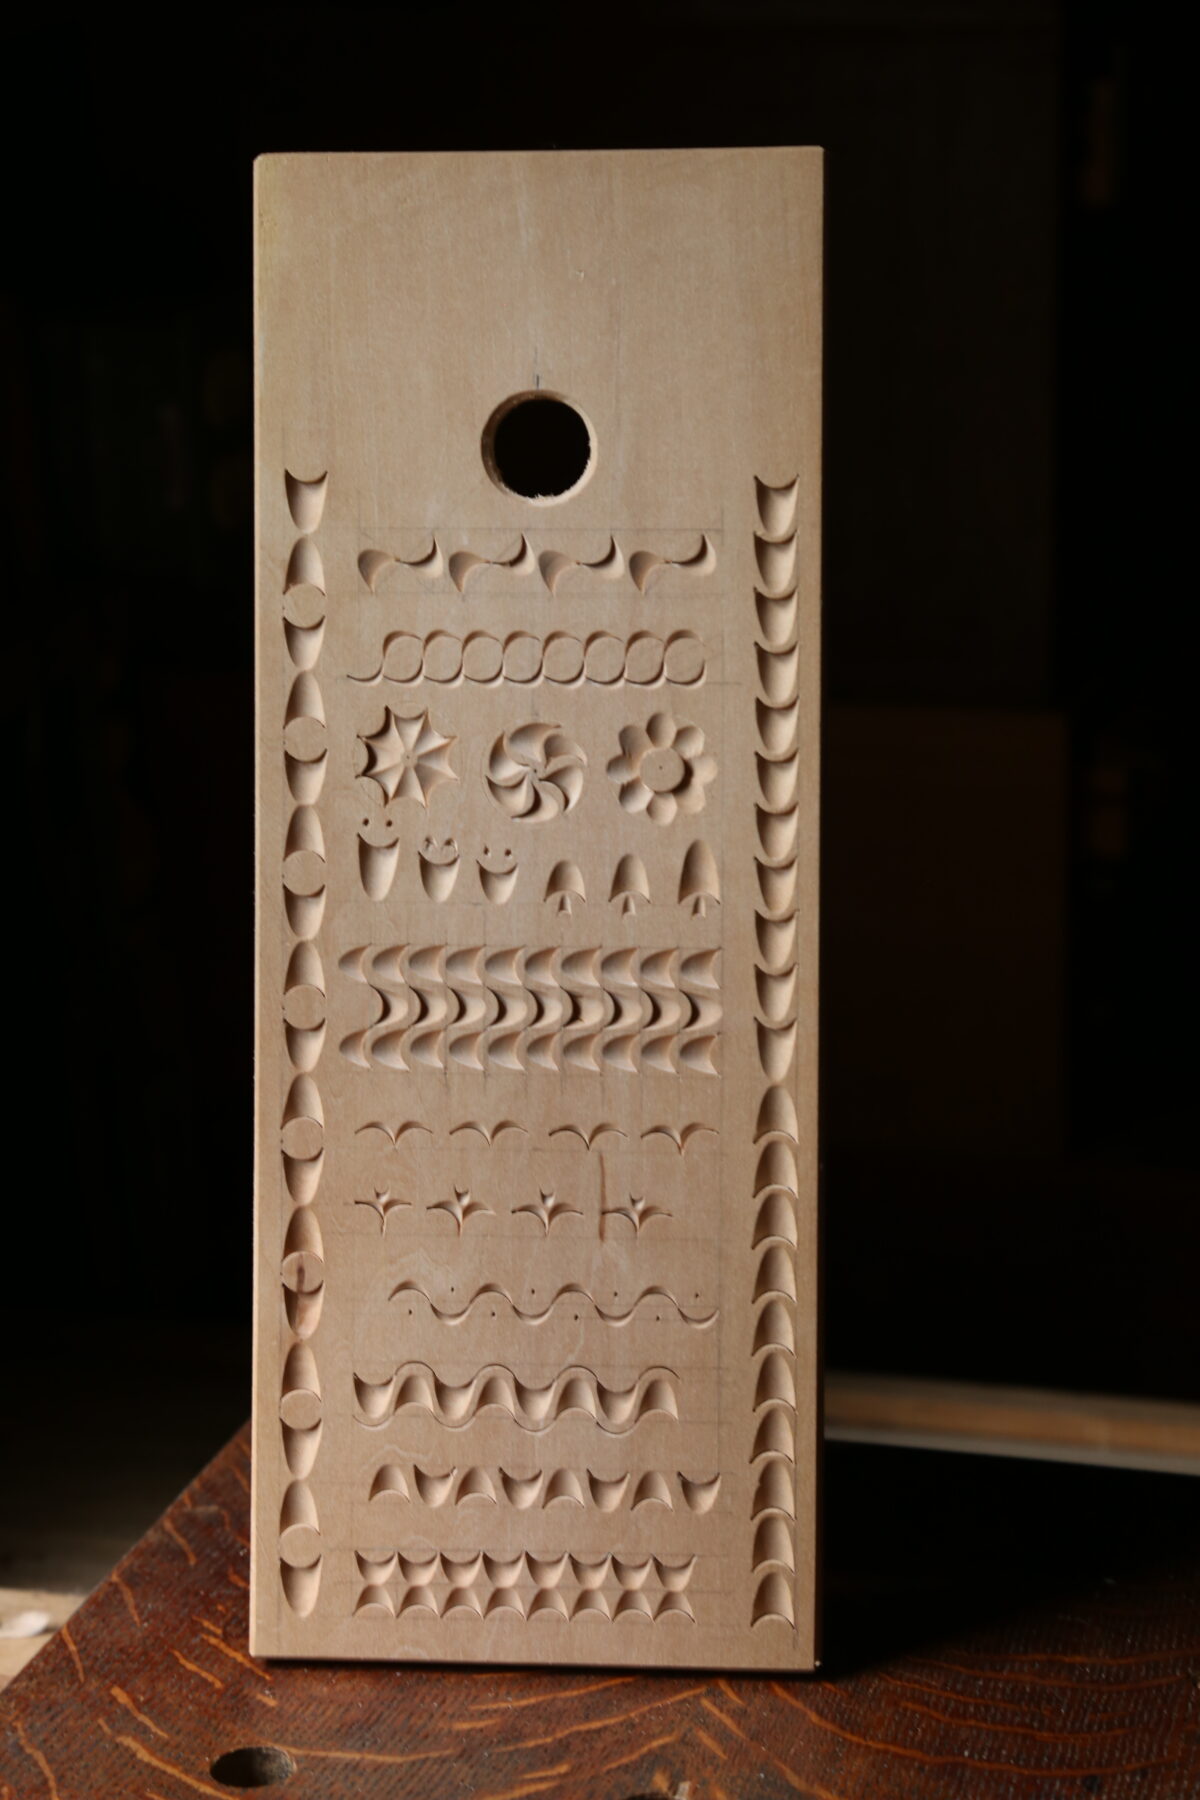 A narrow basswood board featuring different patterns carved with a single gouge. Light rakes across it from the left, showing deep shadow contrasting against the light basswood.